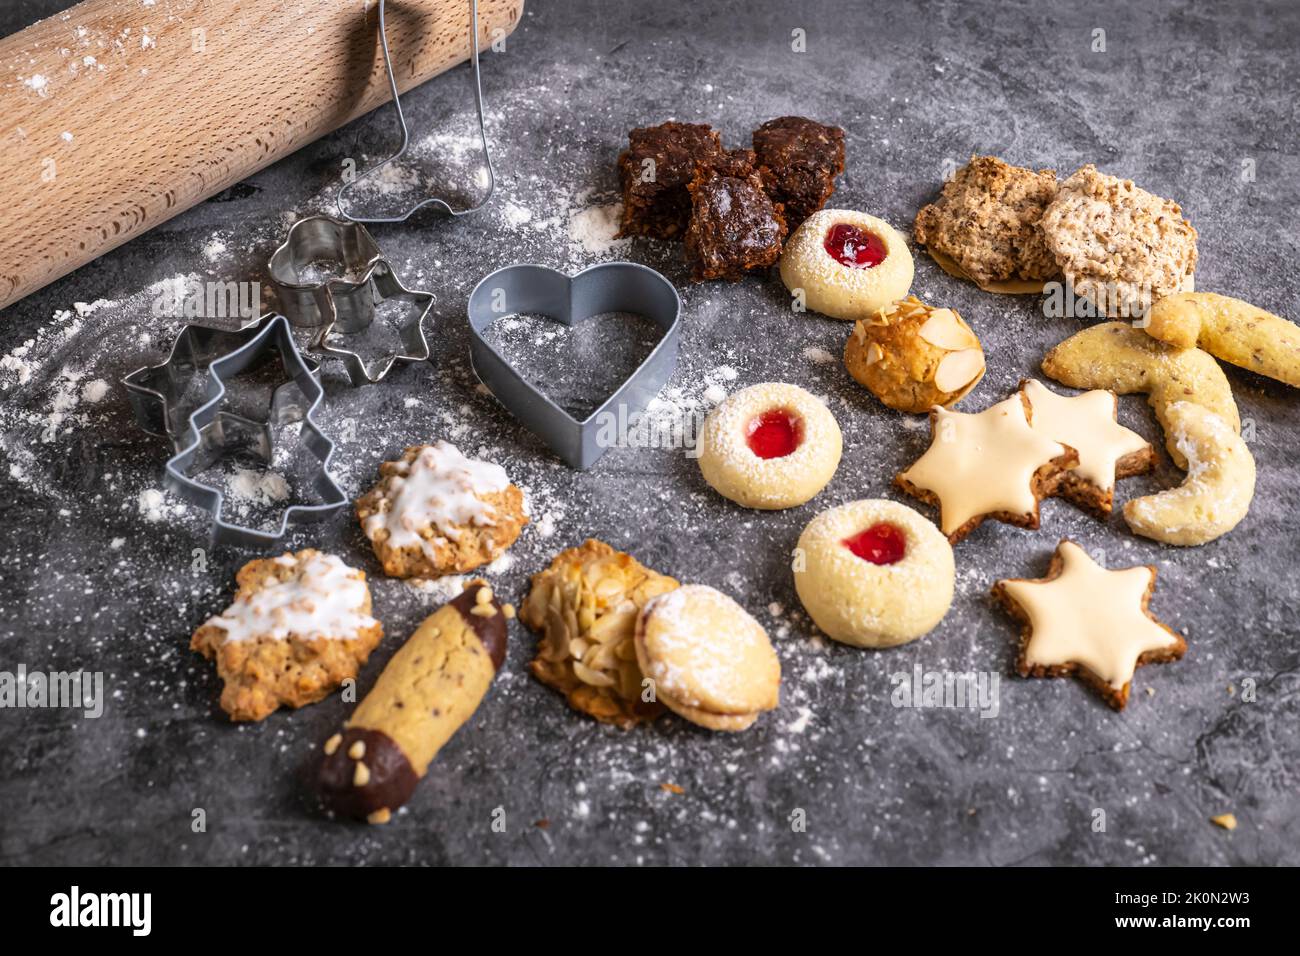 Christmas treats, freshly baked Christmas biscuits with baking utensils Stock Photo